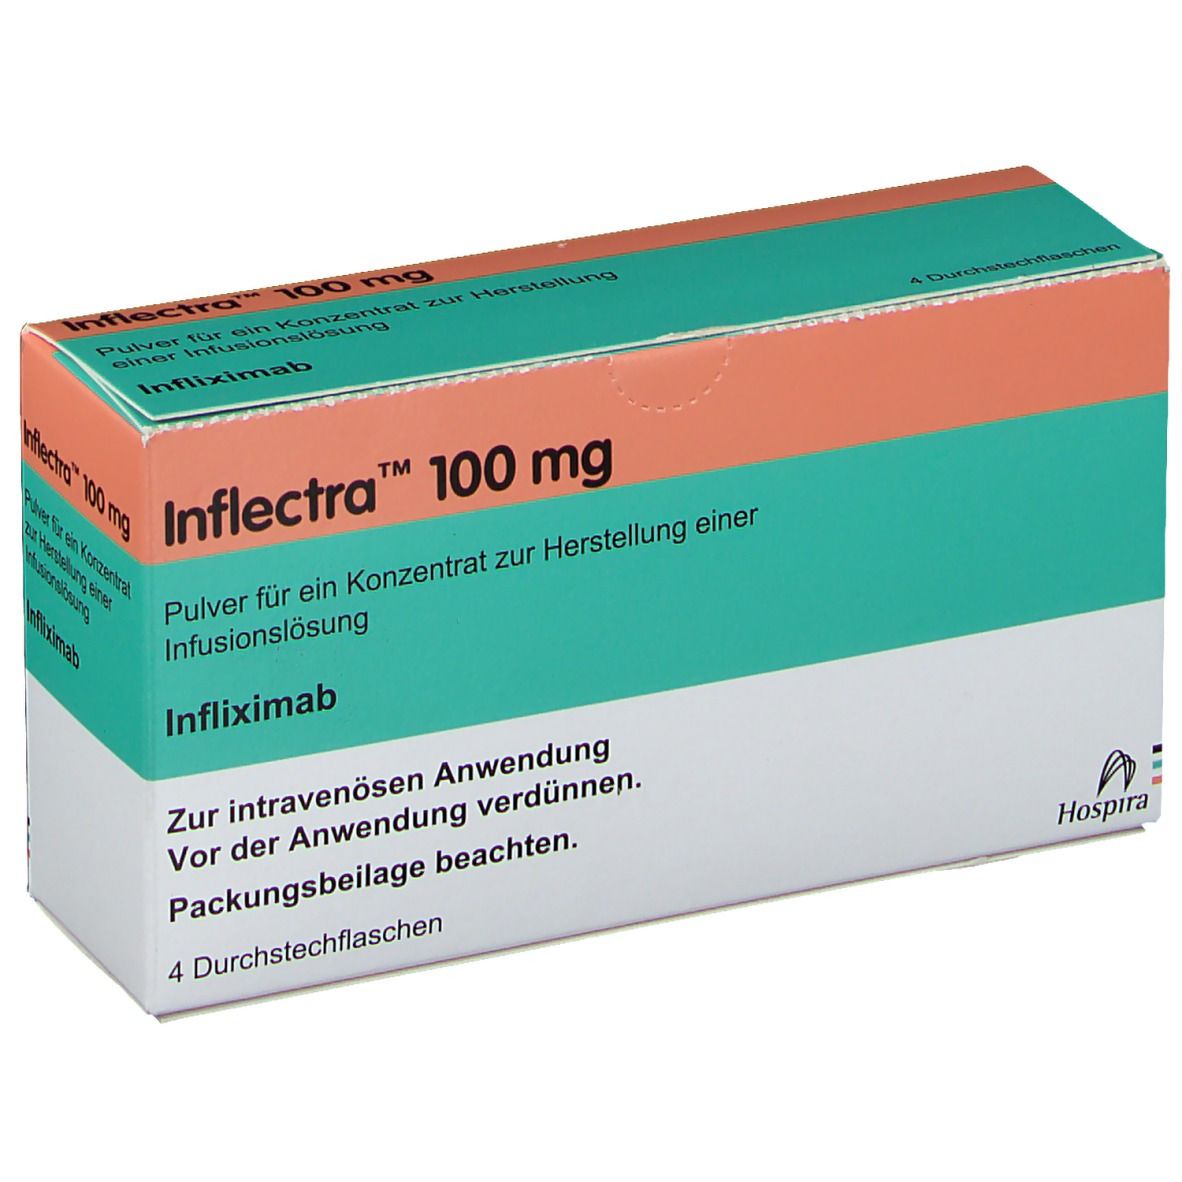 Inflectra™ 100 mg